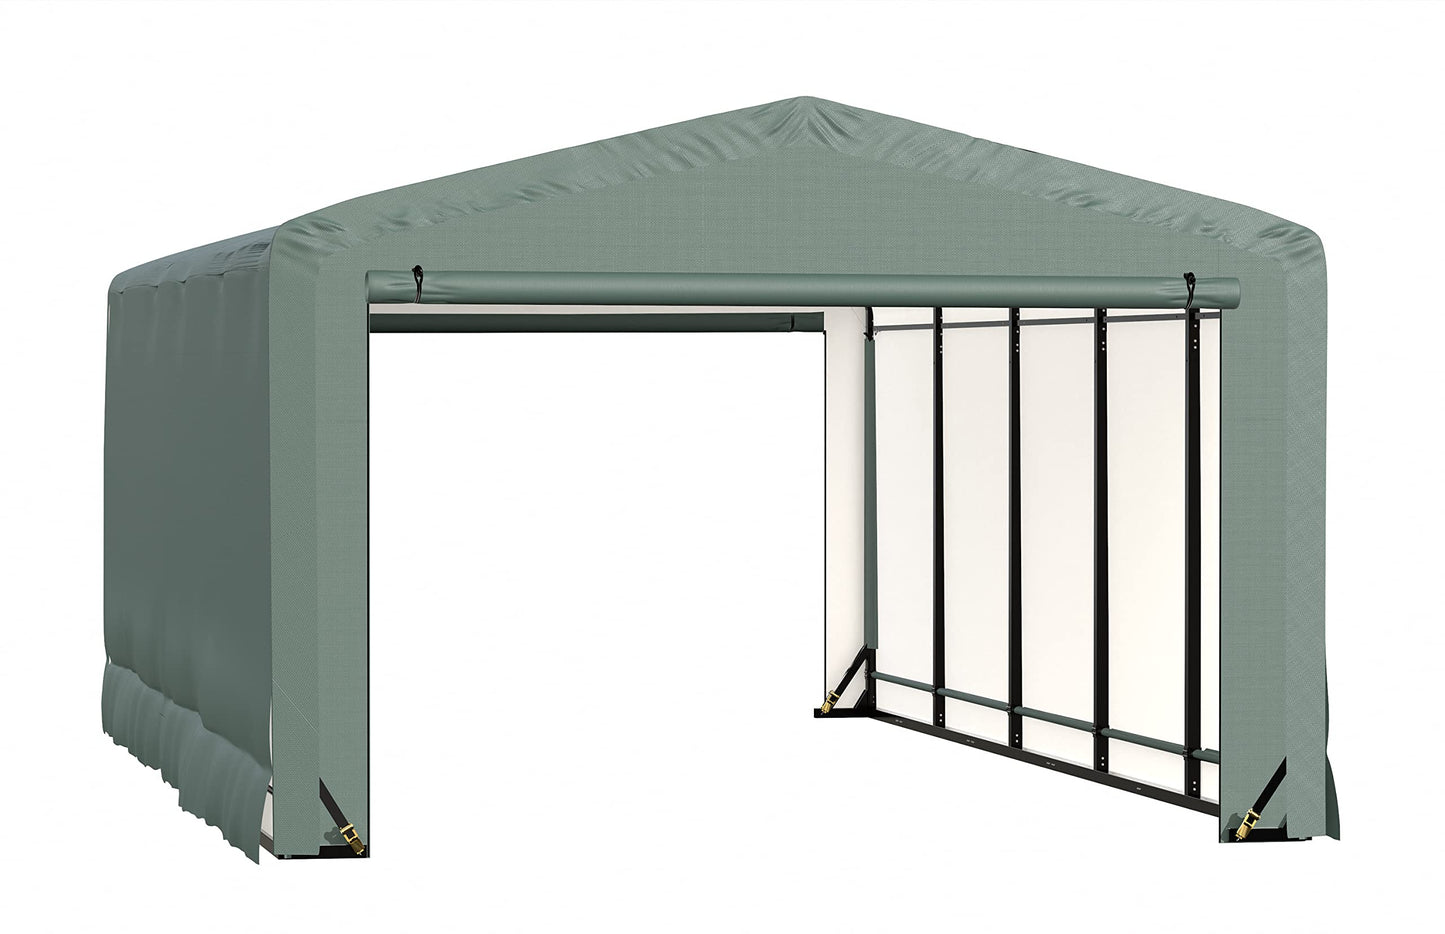 ShelterLogic ShelterTube Garage & Storage Shelter, 12' x 27' x 8' Heavy-Duty Steel Frame Wind and Snow-Load Rated Enclosure, Green 12' x 27' x 8'